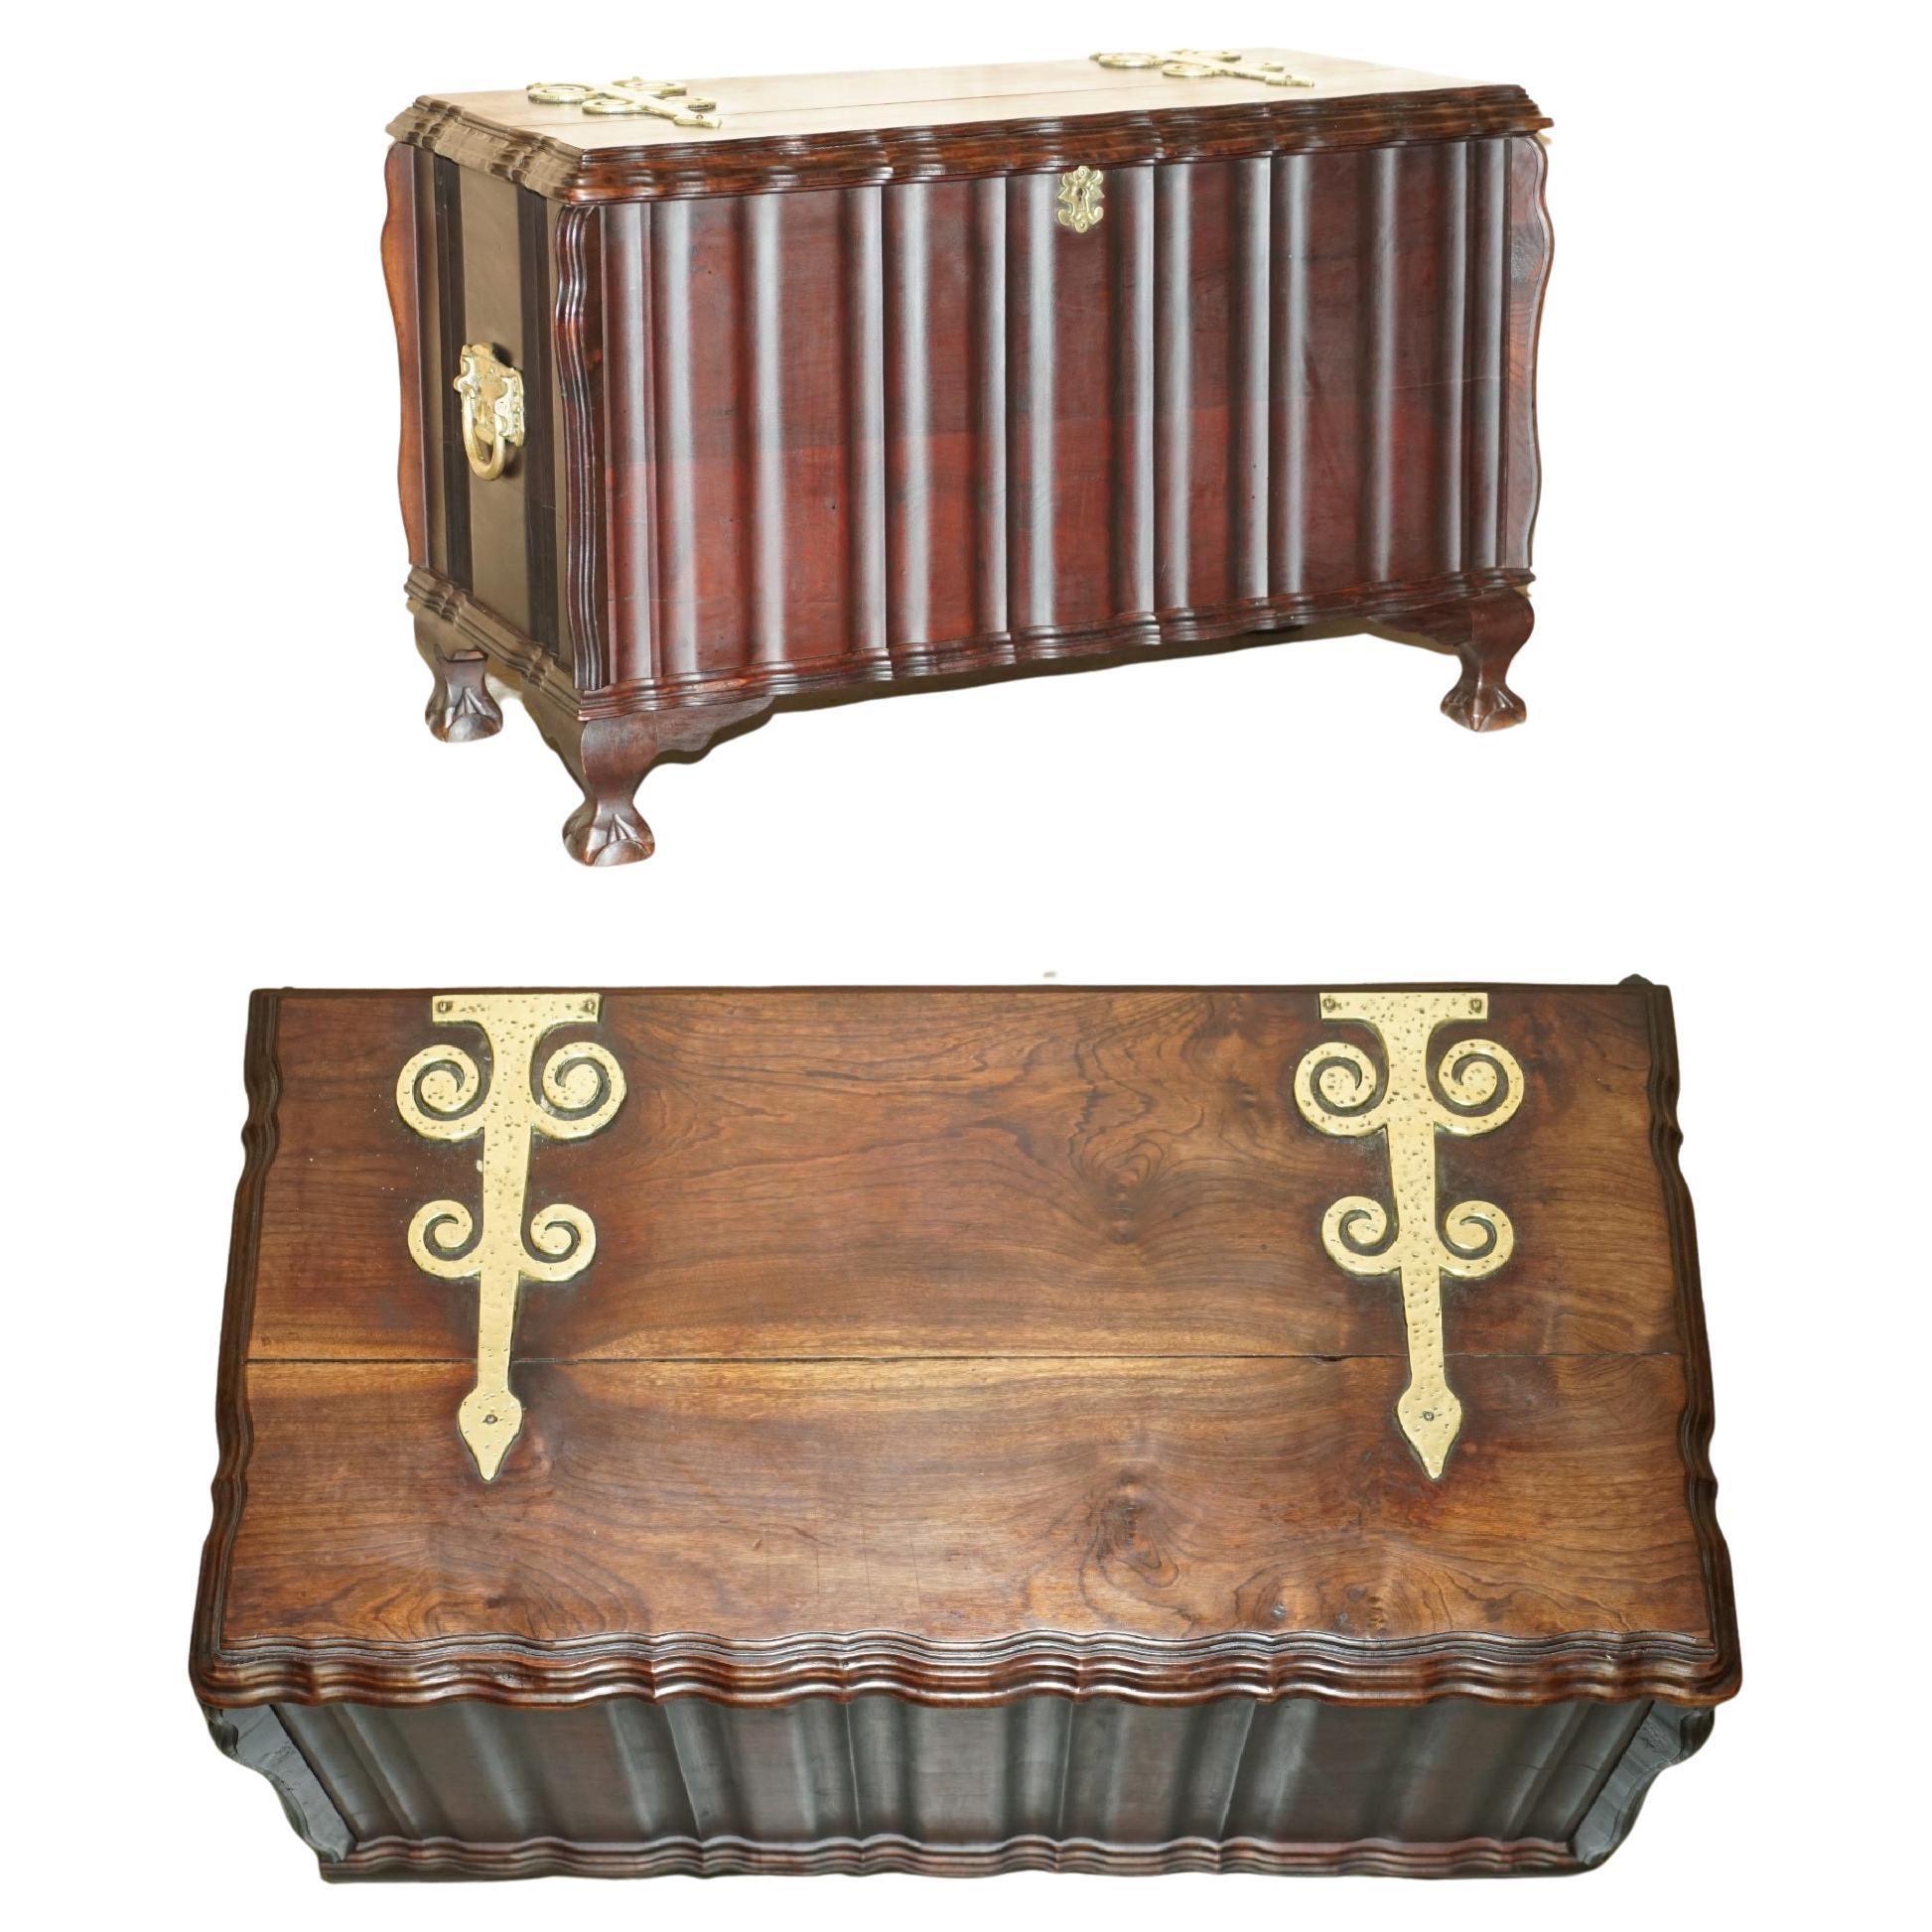 ViNTAGE HAND CARVED HARDWOOD TRUNK OR CHEST WITH ORNATE OVERSIZED BRASS FITTINGS For Sale